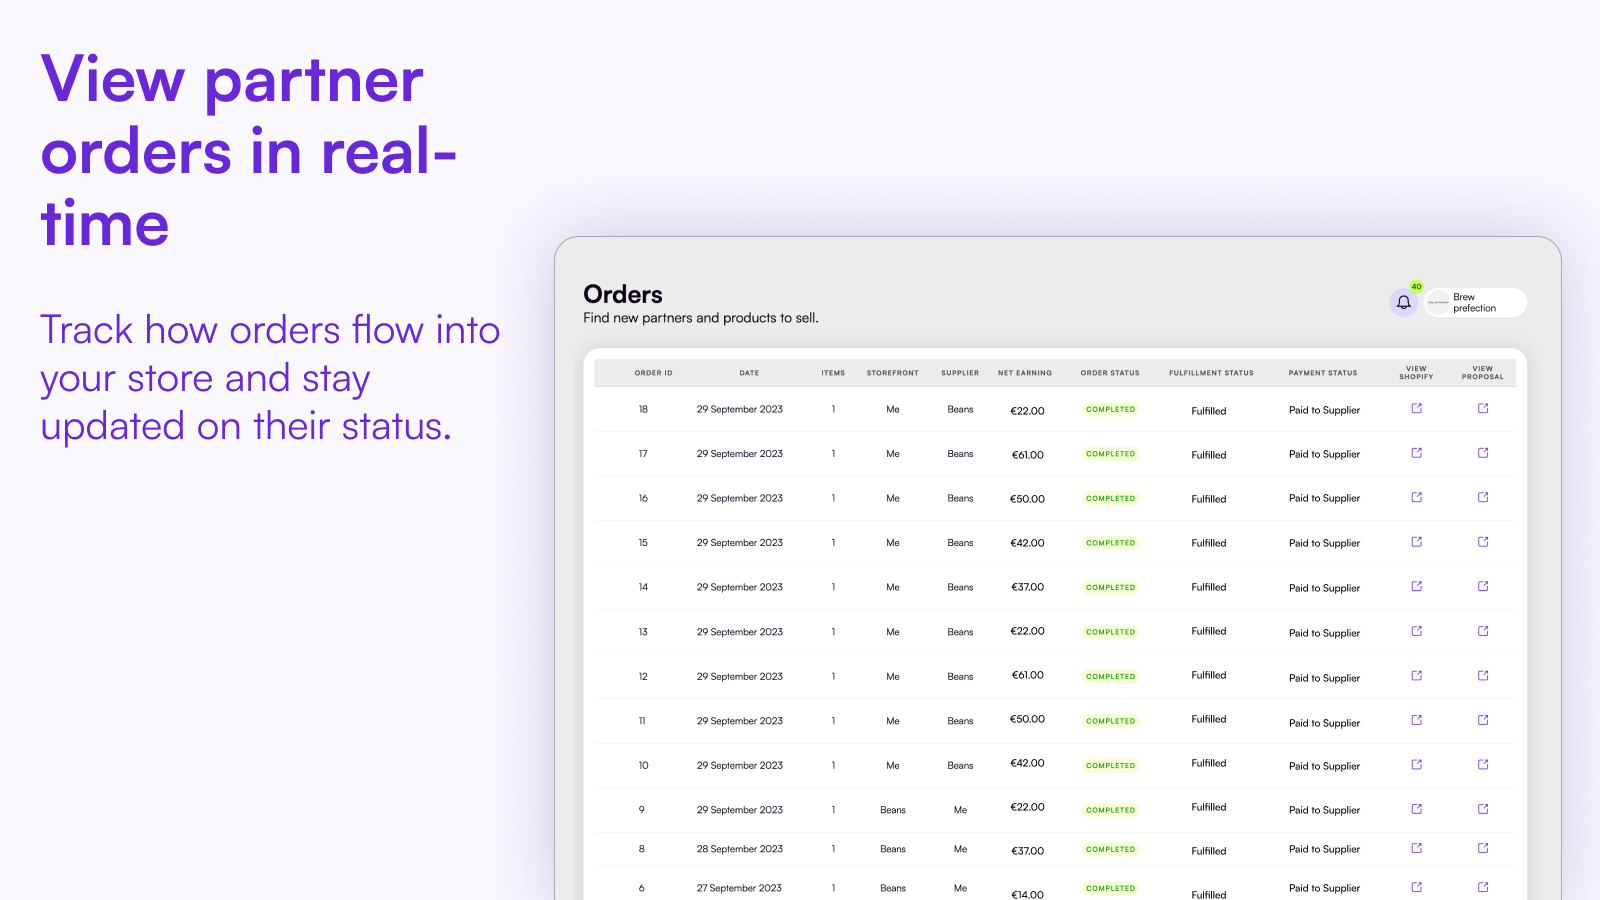 View partner orders in real-time (shopify)